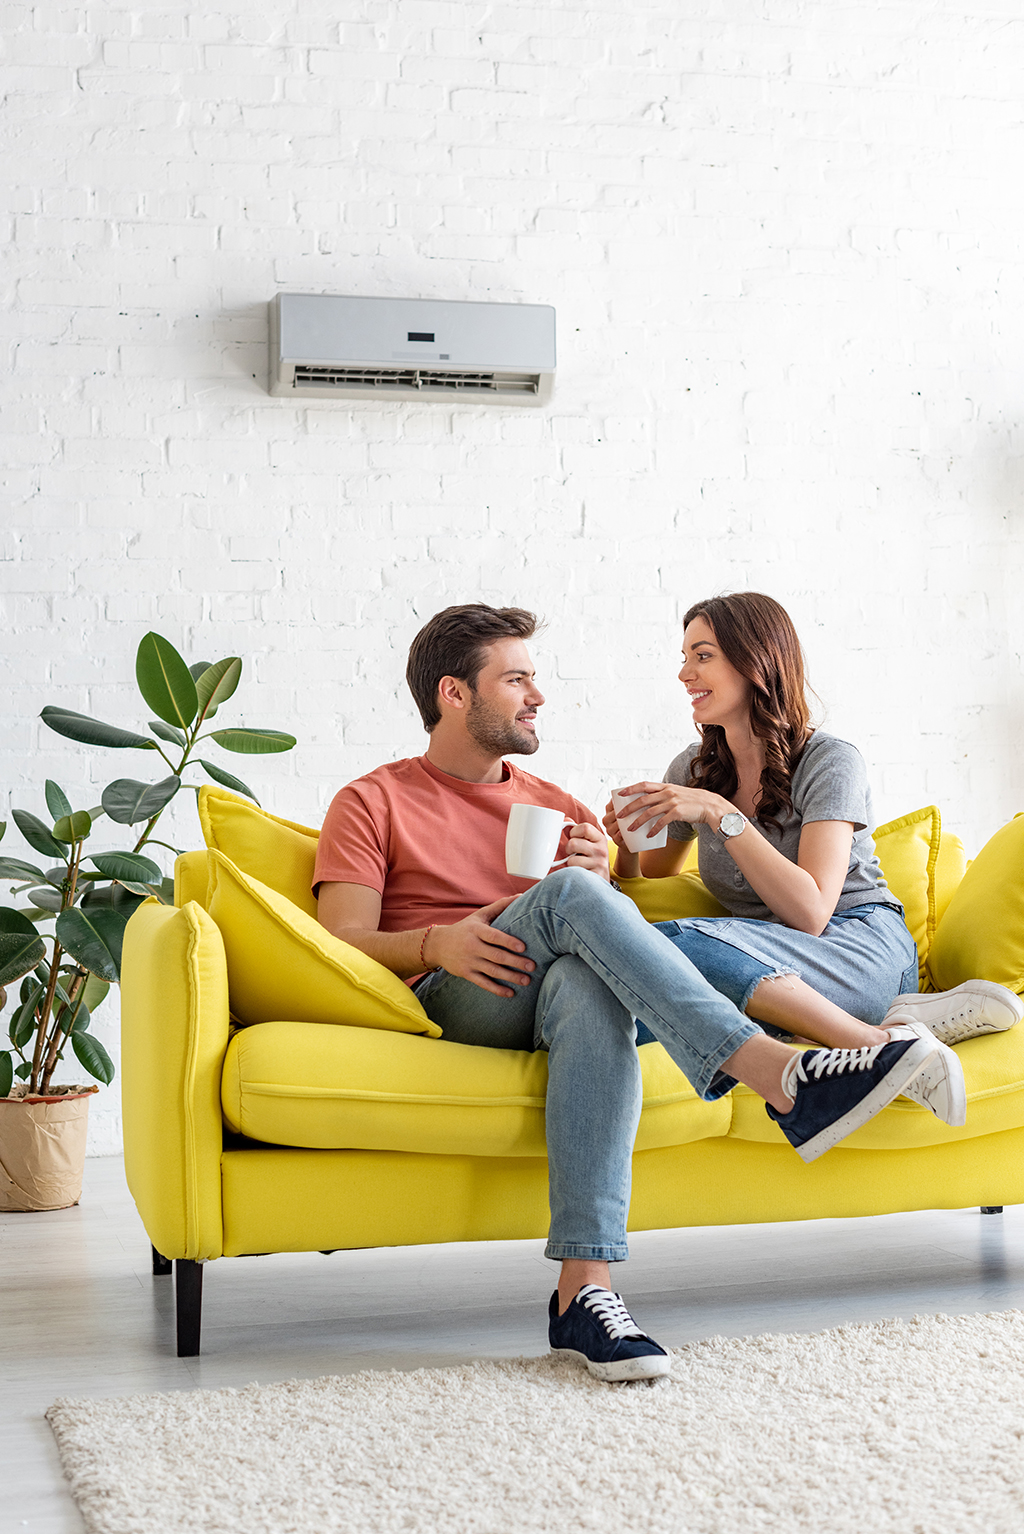 Benefits of Getting a Ductless Mini Split in Your Home | Heating and AC in Plano, TX